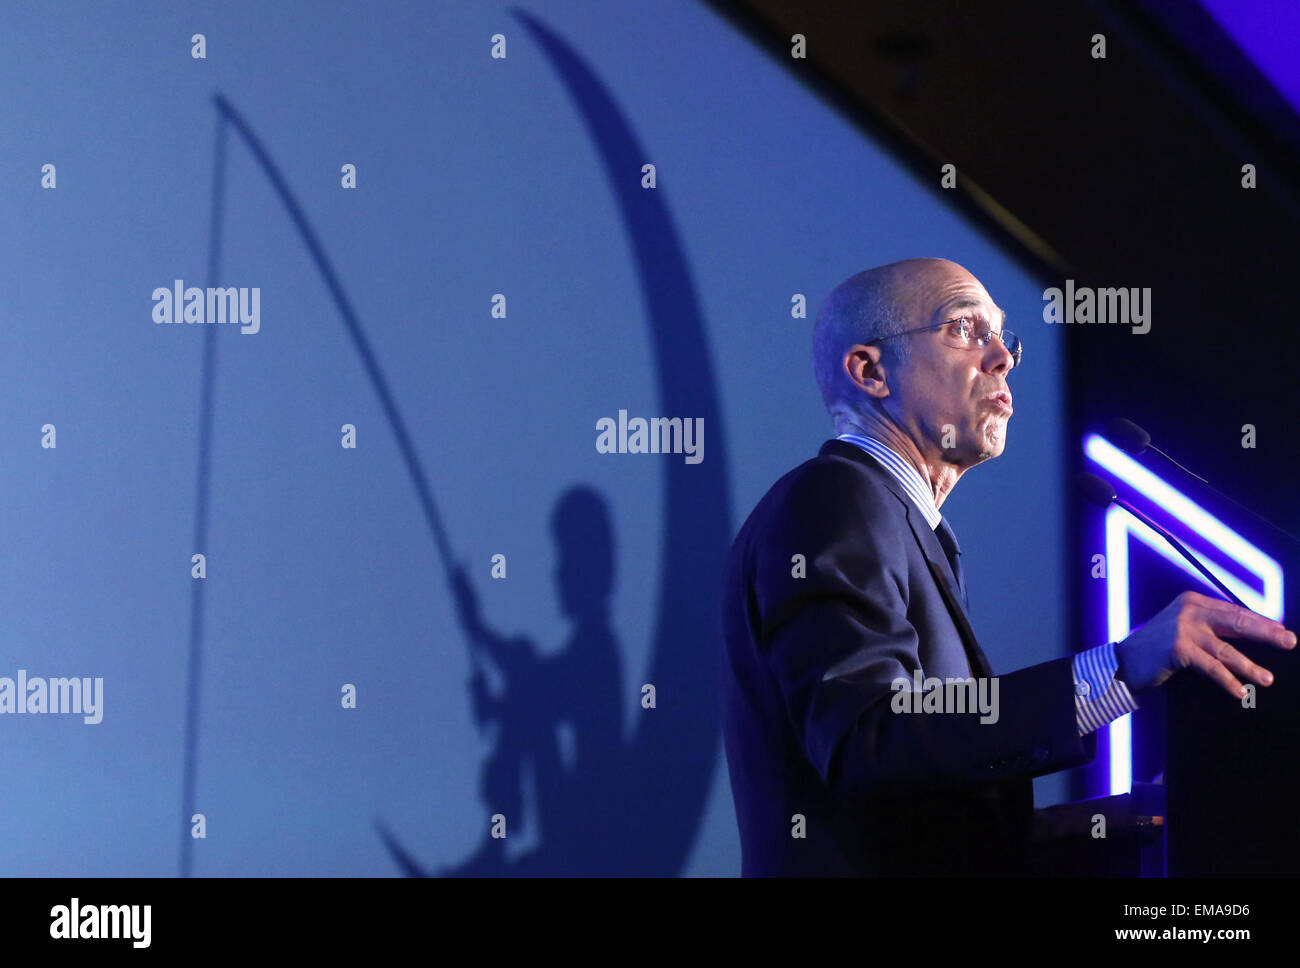 (150418) -- BEIJING, April 18, 2015 (Xinhua) -- Jeffrey Katzenberg, CEO and Director of DreamWorks Animation SKG., addresses the International Film Group Summit during the fifth Beijing International Film Festival (BJIFF) in Beijing, capital of China, April 18, 2015. (Xinhua/Yin Gang) (wjq) Stock Photo